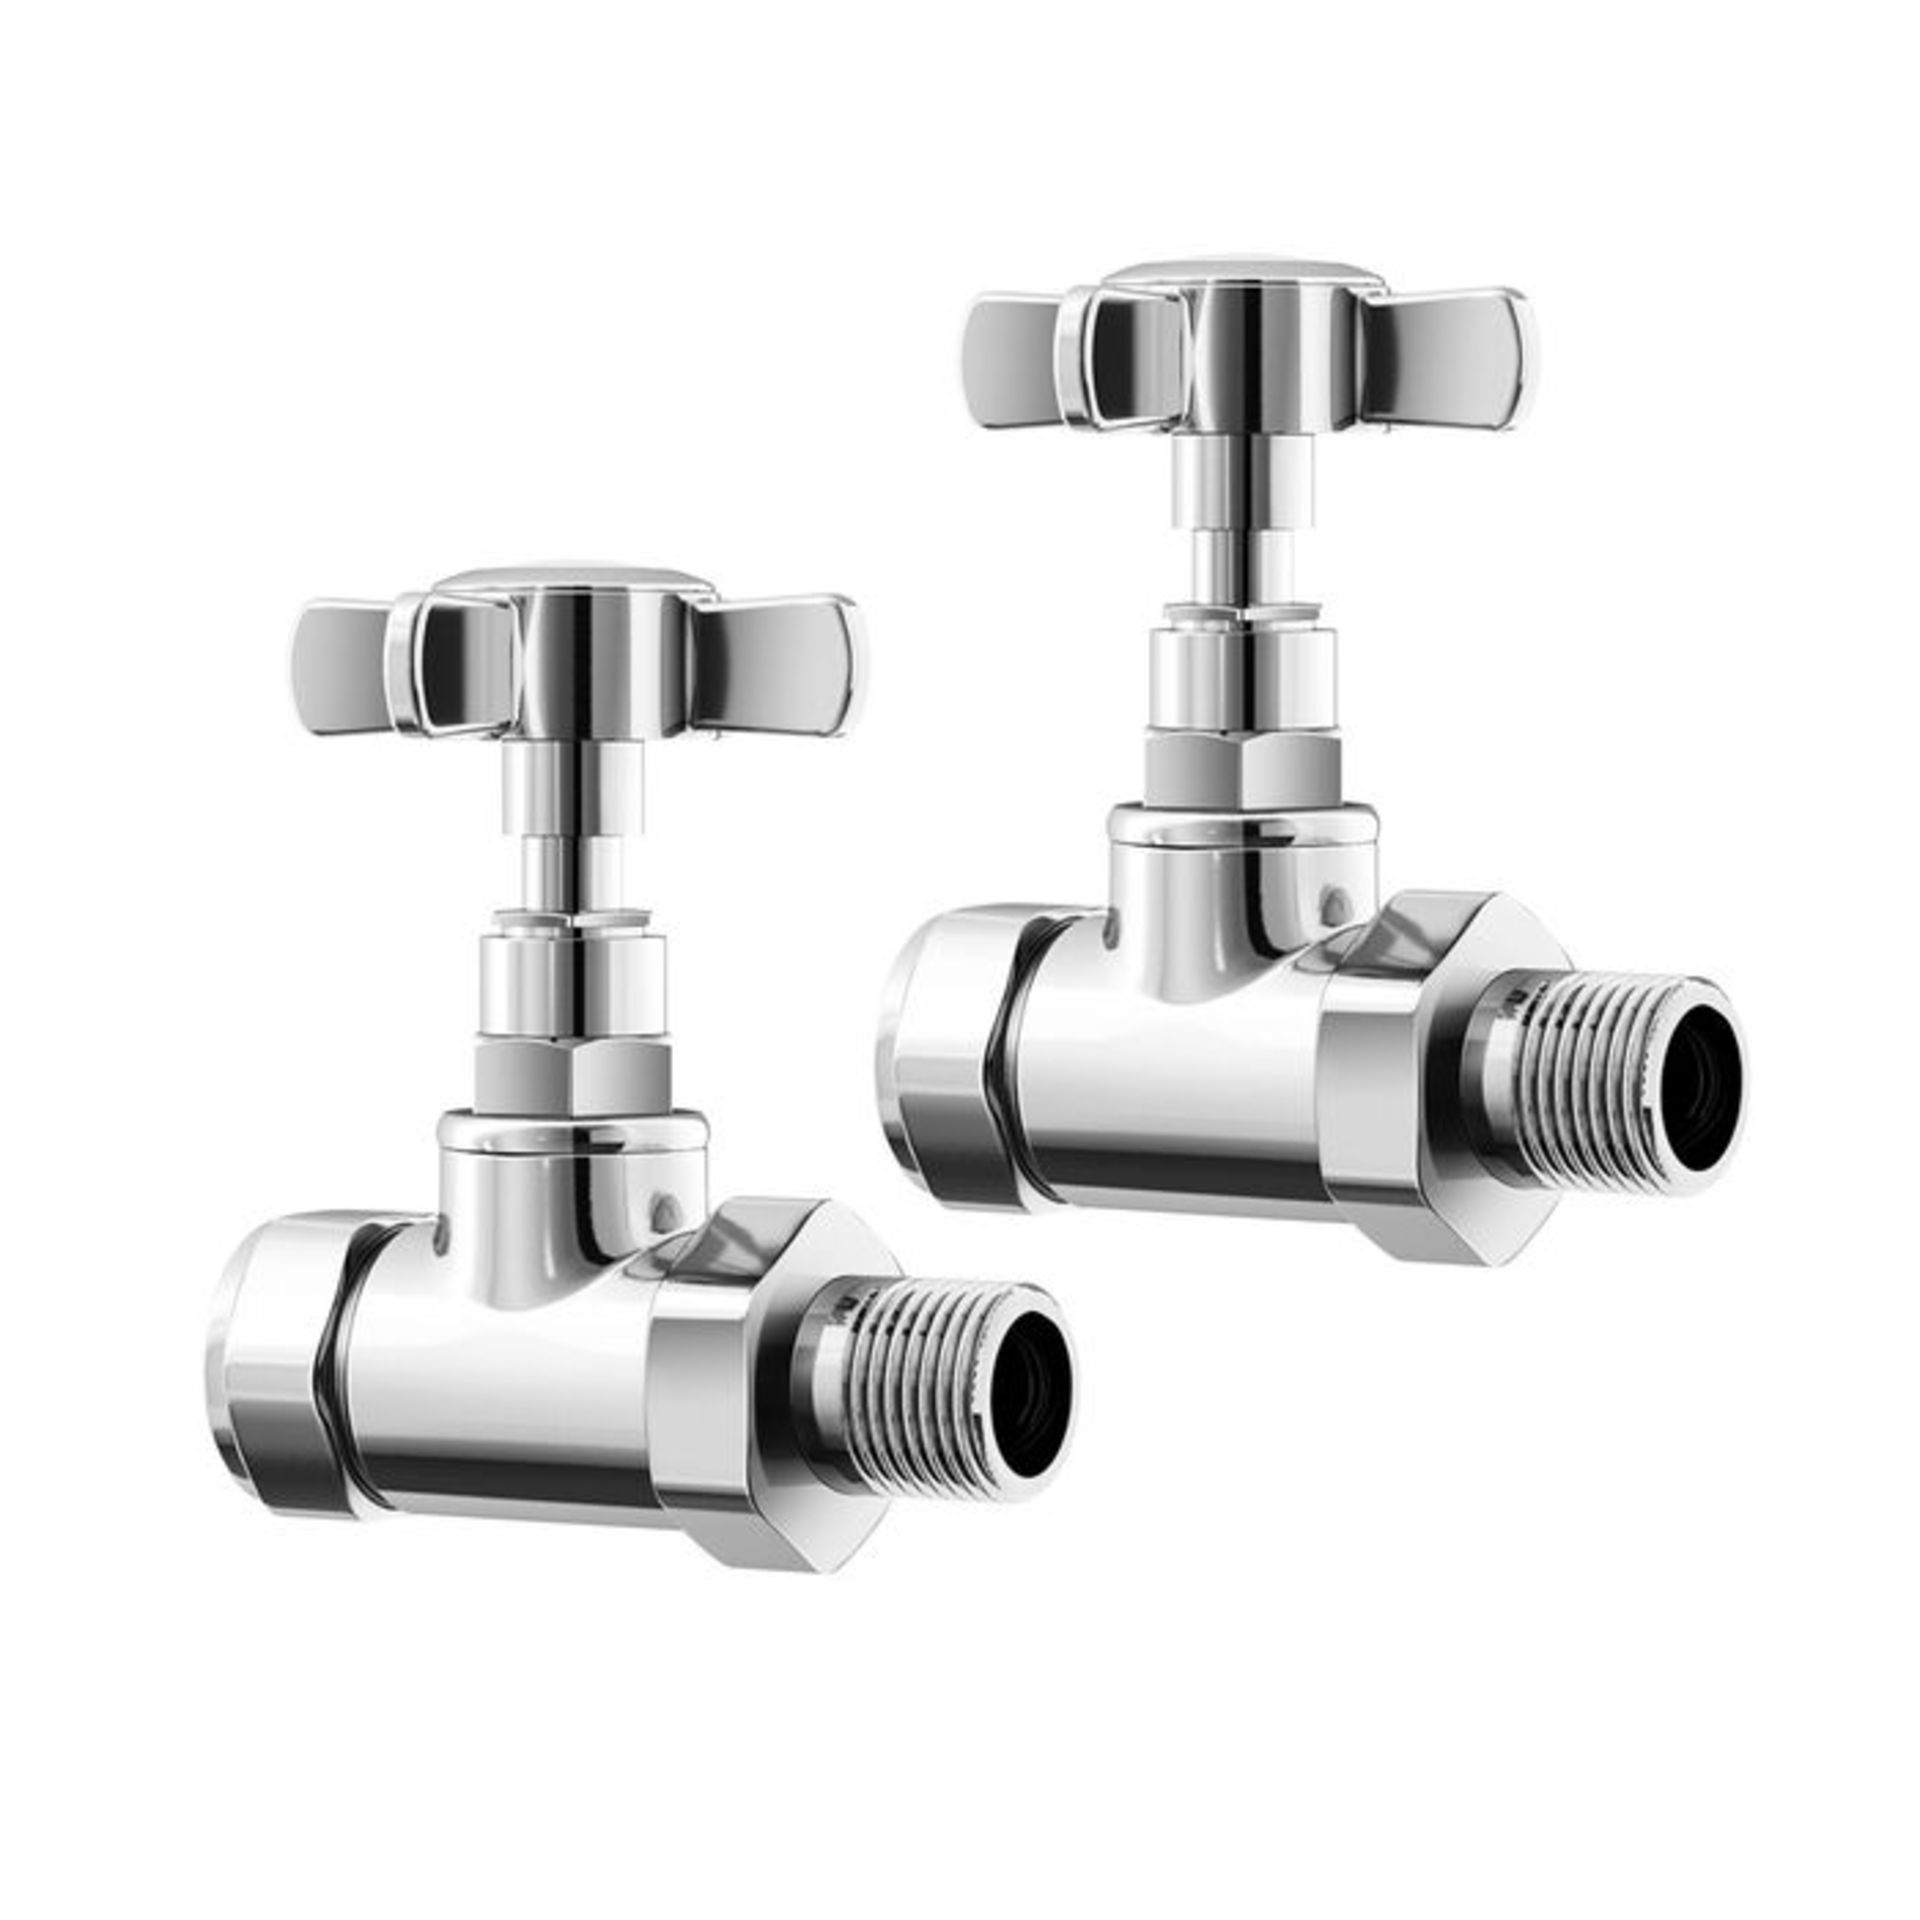 (NV1003) 15mm Standard Connection Straight Polished Chrome Radiator Valves Chrome Plated Solid... - Image 2 of 3